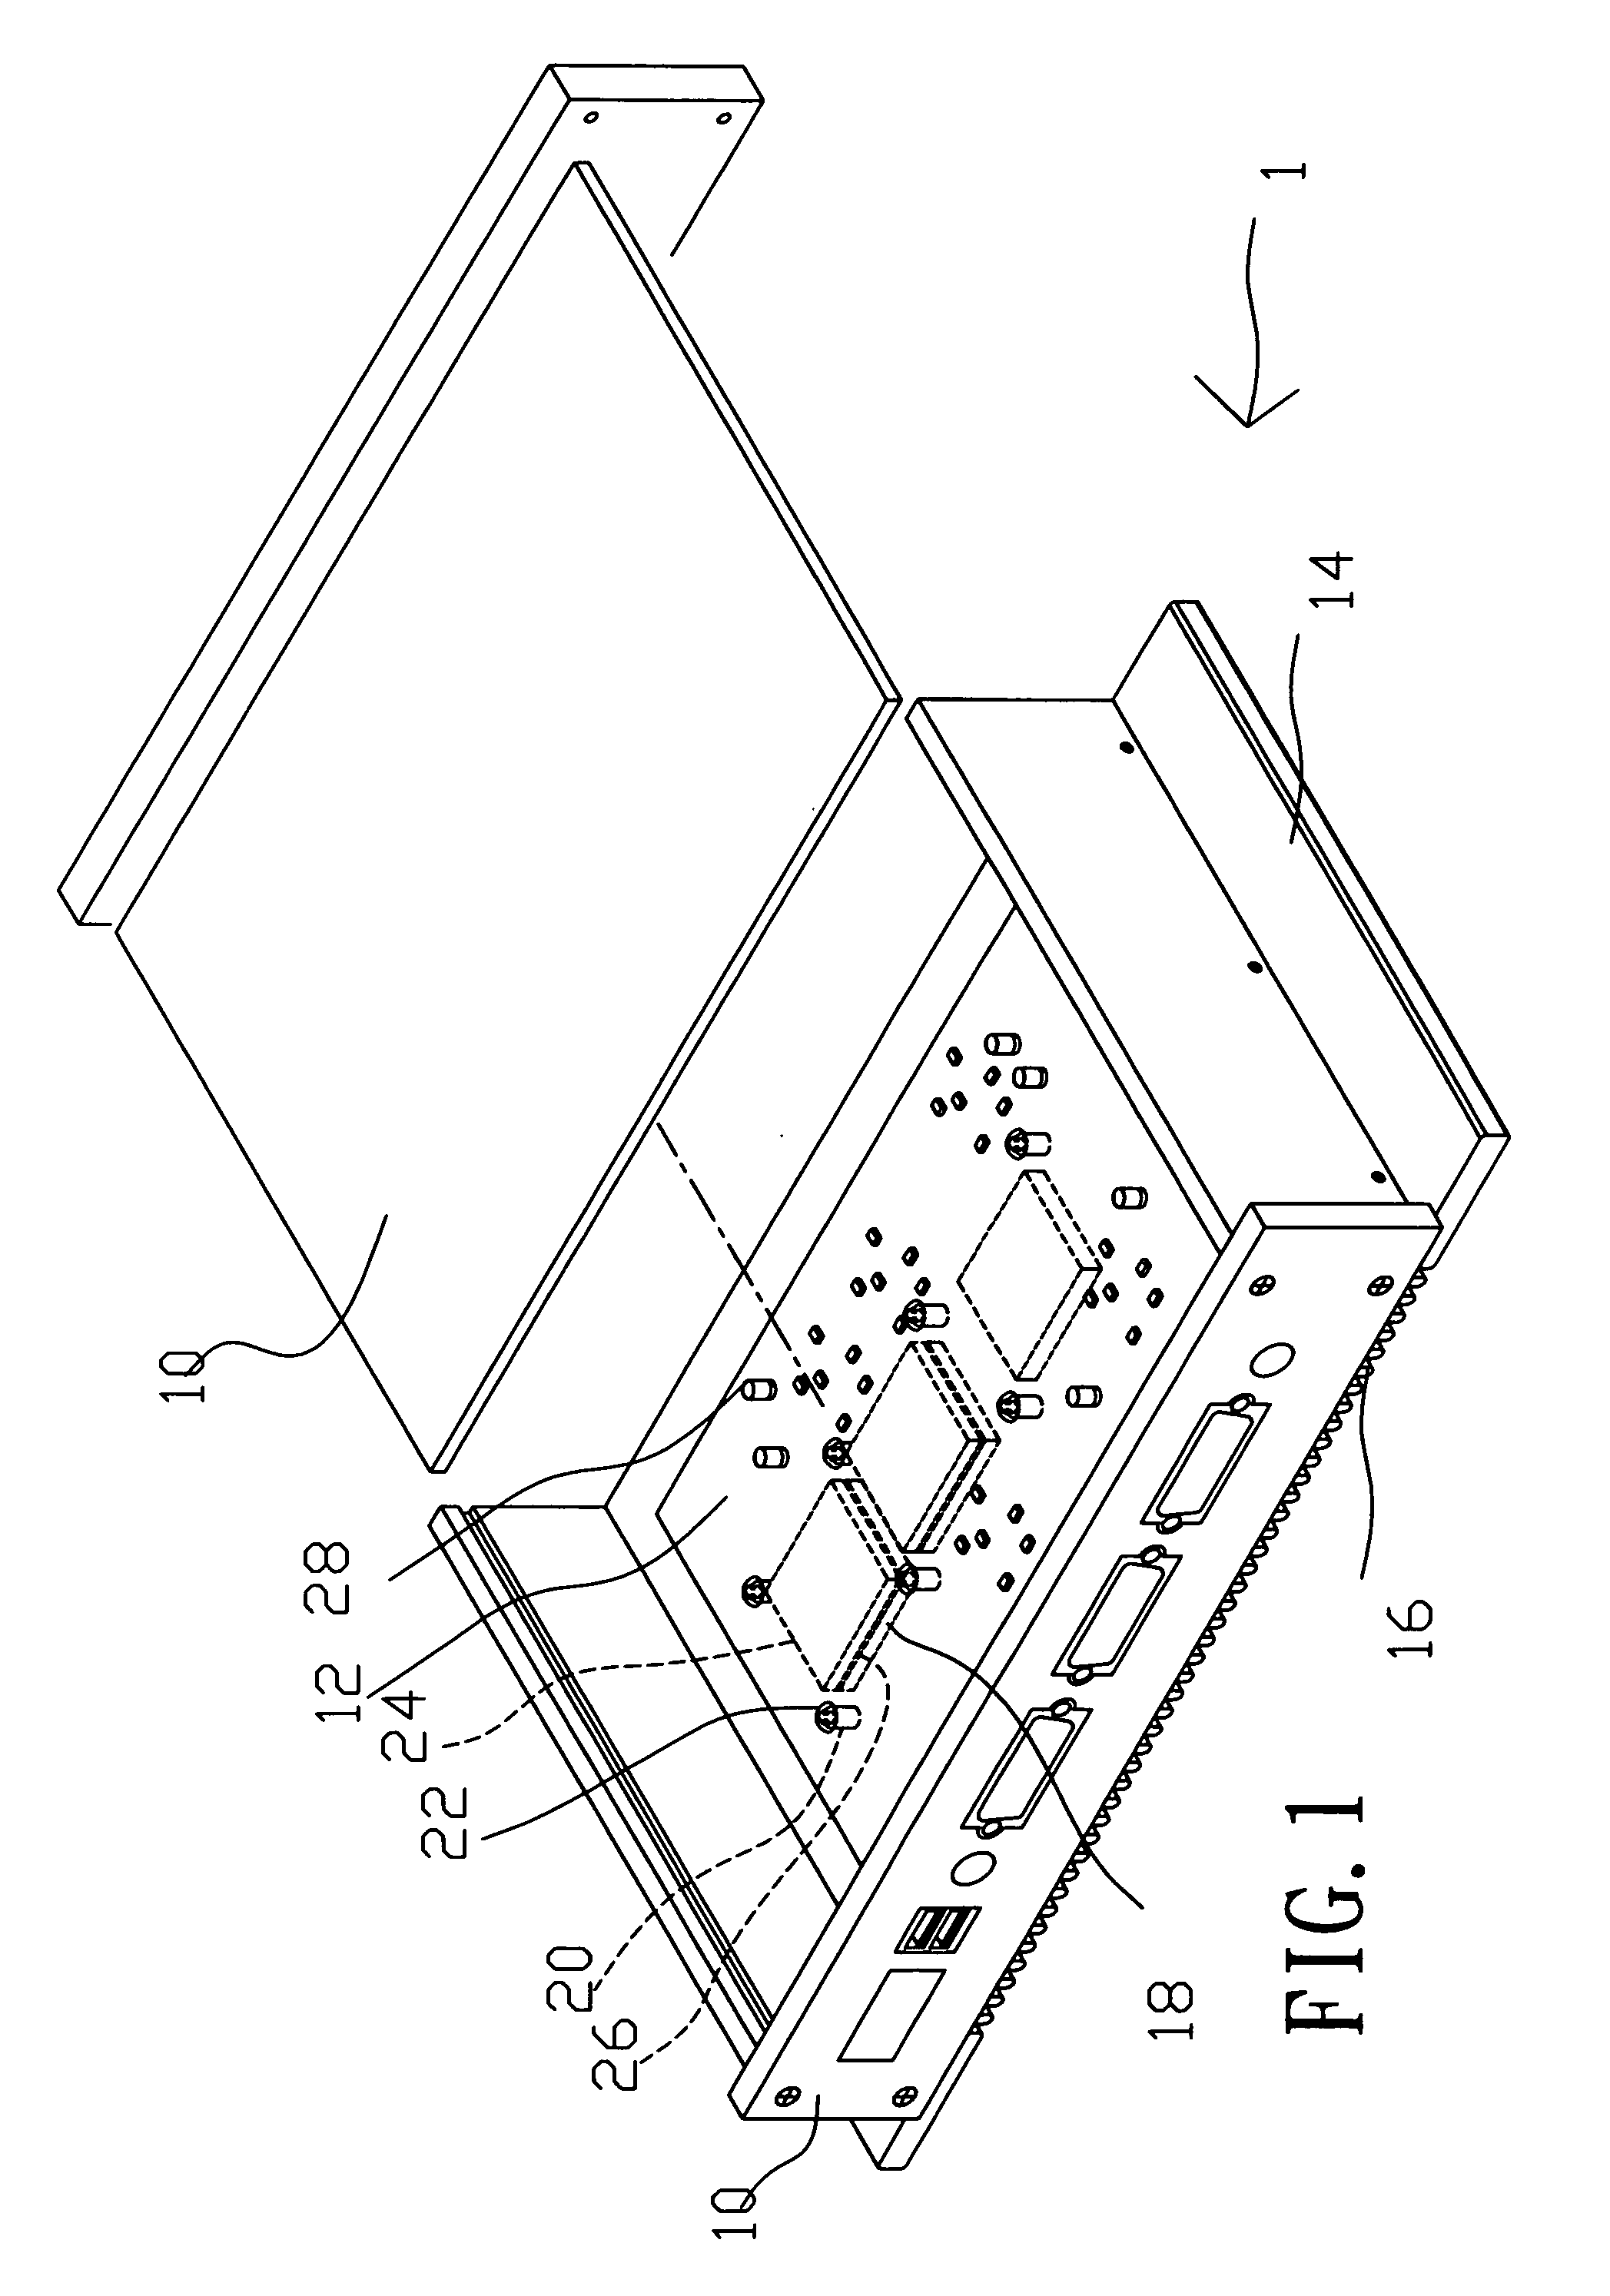 Heat dissipation structure of an electronic device